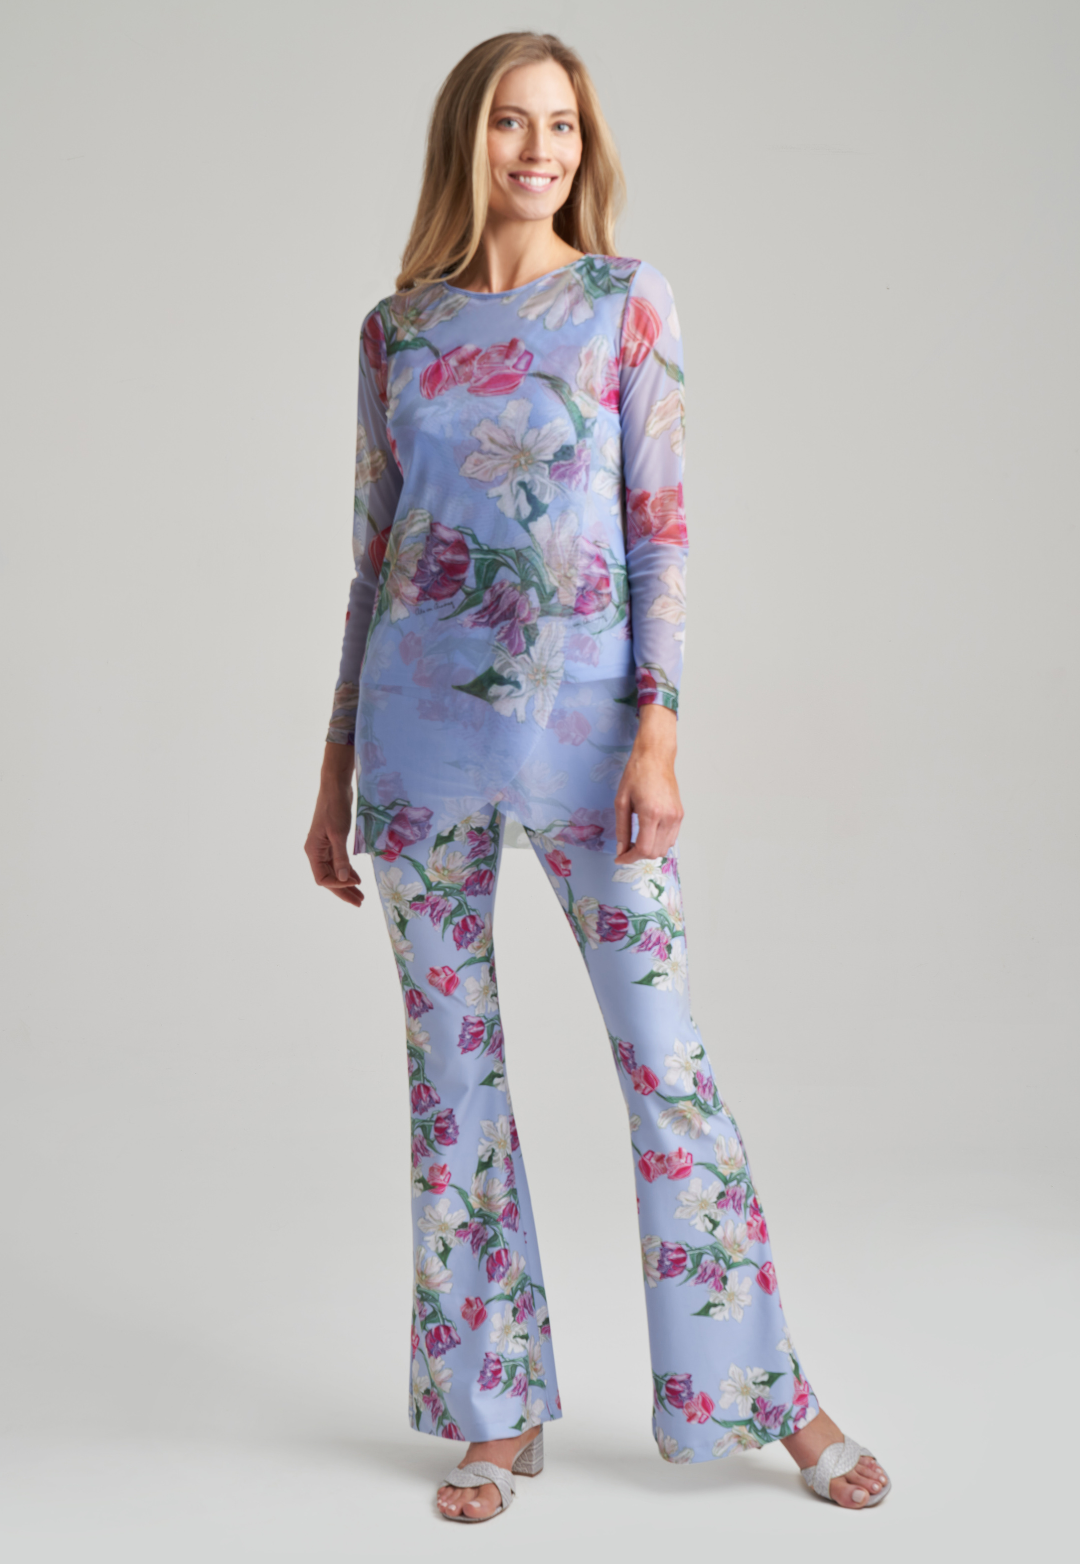 Woman wearing tulip printed mesh tunic with stretch knit pants and tank top in tulips by Ala von Auersperg for spring summer 2021